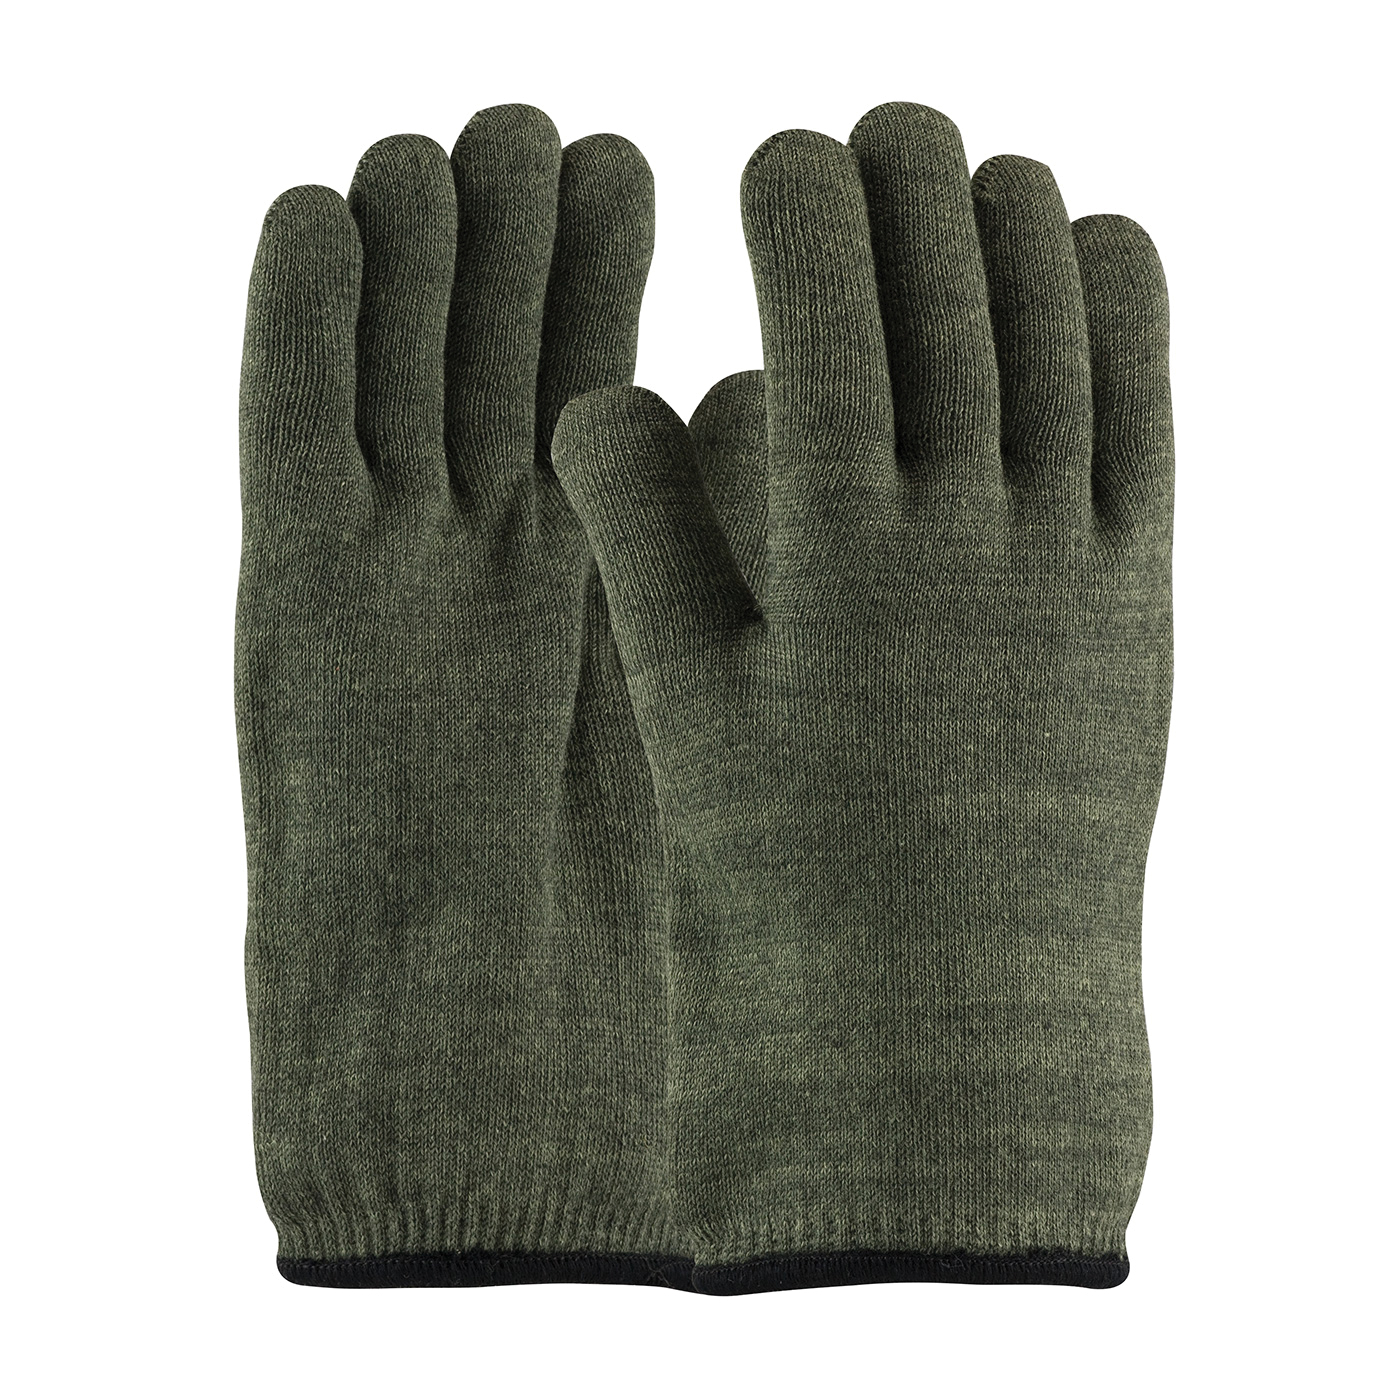 PIP® Kut-Gard® 43-850L Hot Mill Gloves, L, Kevlar®/Preox, Dark Green, Cotton Terry Lining, Open Cuff, Uncoated Coating, 11 in L, Resists: Abrasion, Cut and Flame